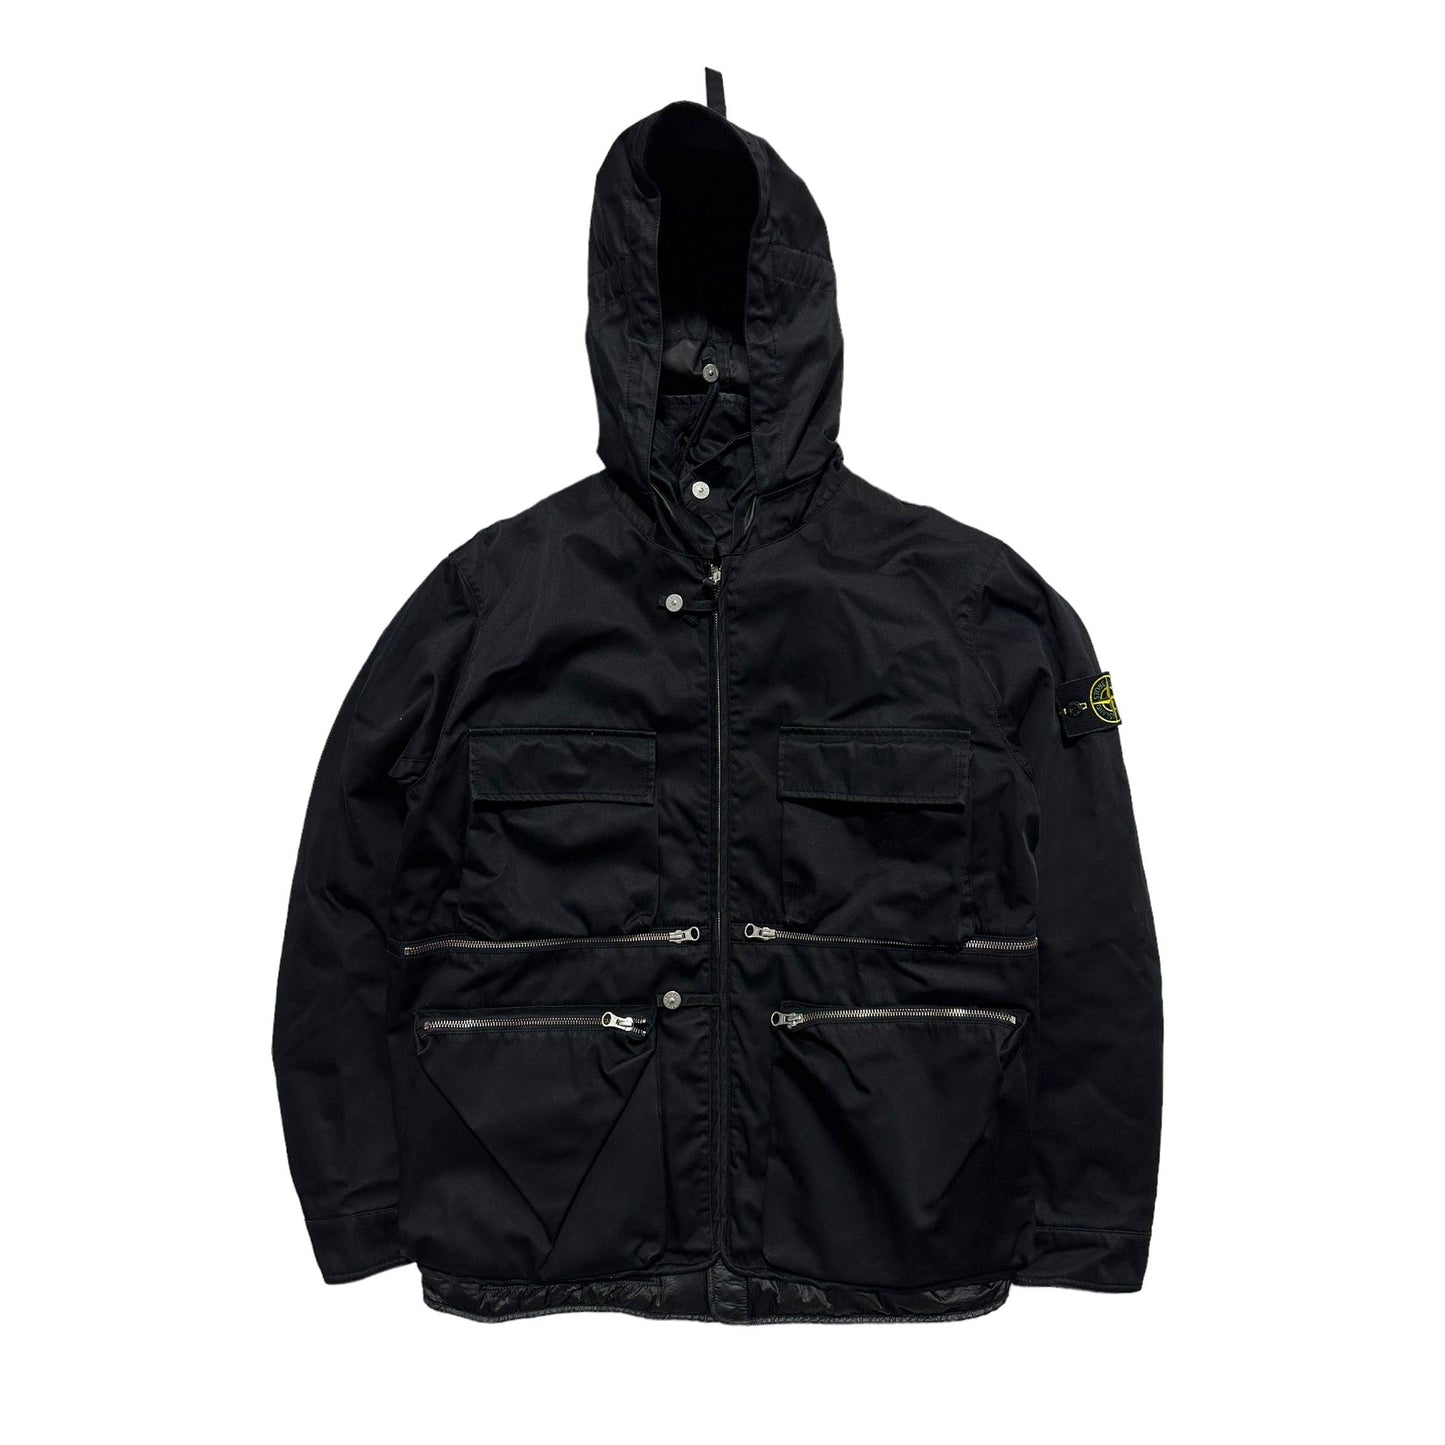 Stone Island X Supreme Helicopter MultiPocket Jacket with Inner - Known Source